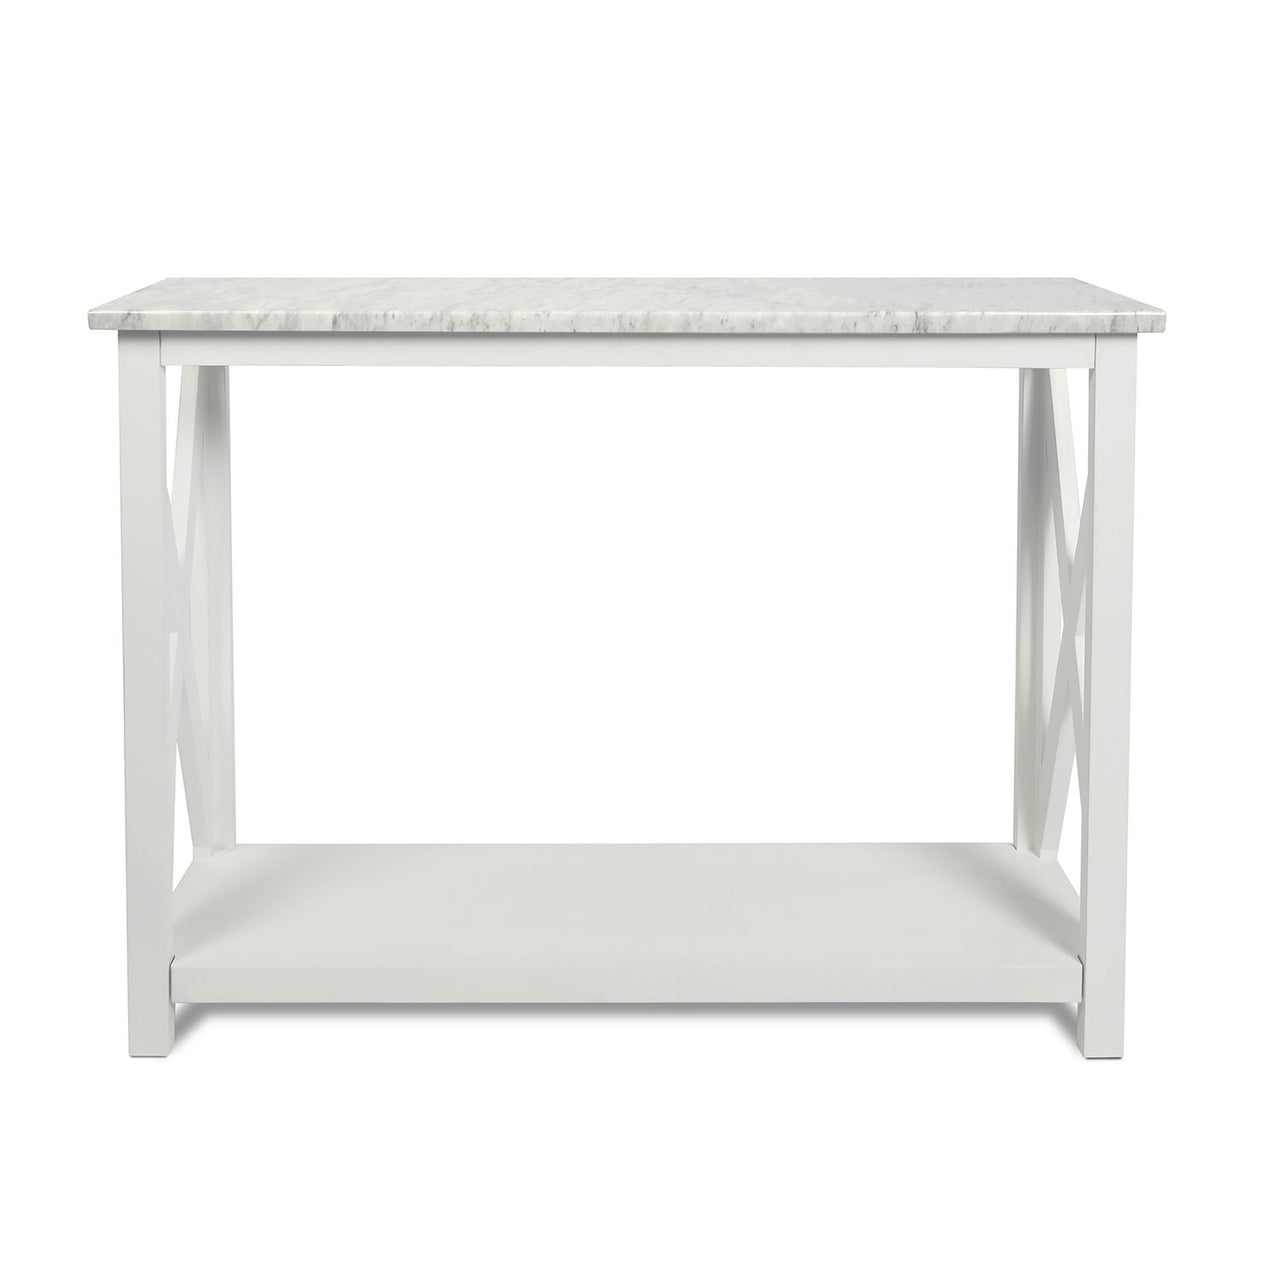 Agatha 39" Rectangular Italian Carrara White Marble Console Table with Color Solid Wood Legs Writing Desk The Bianco Collection White 